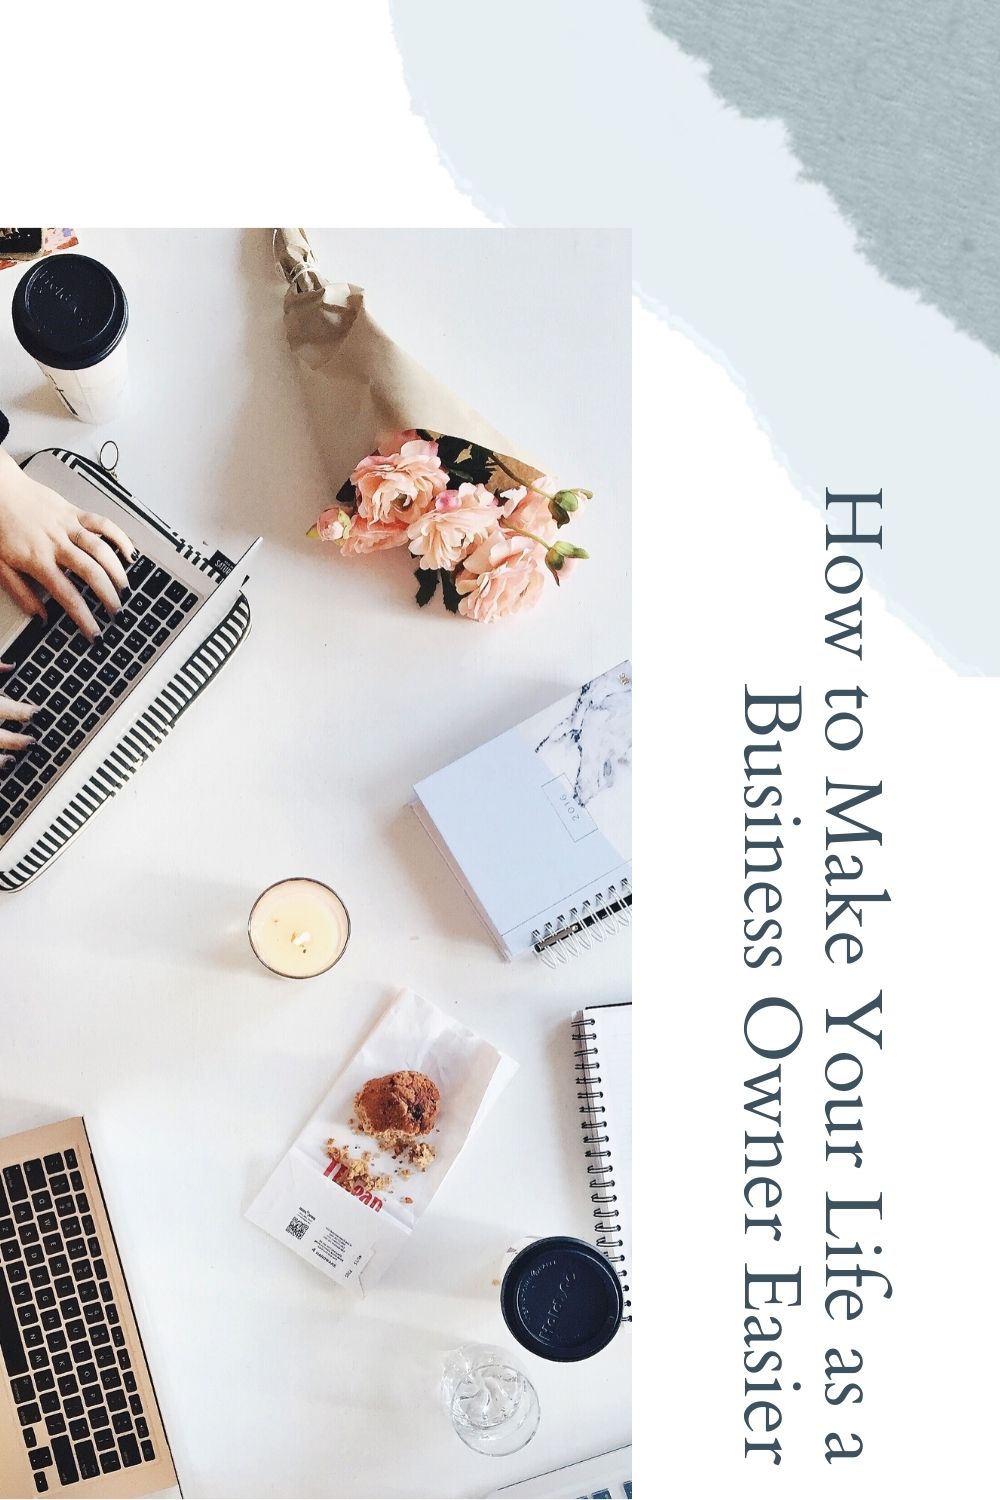 How to Make Your Life as a Business Owner Easier